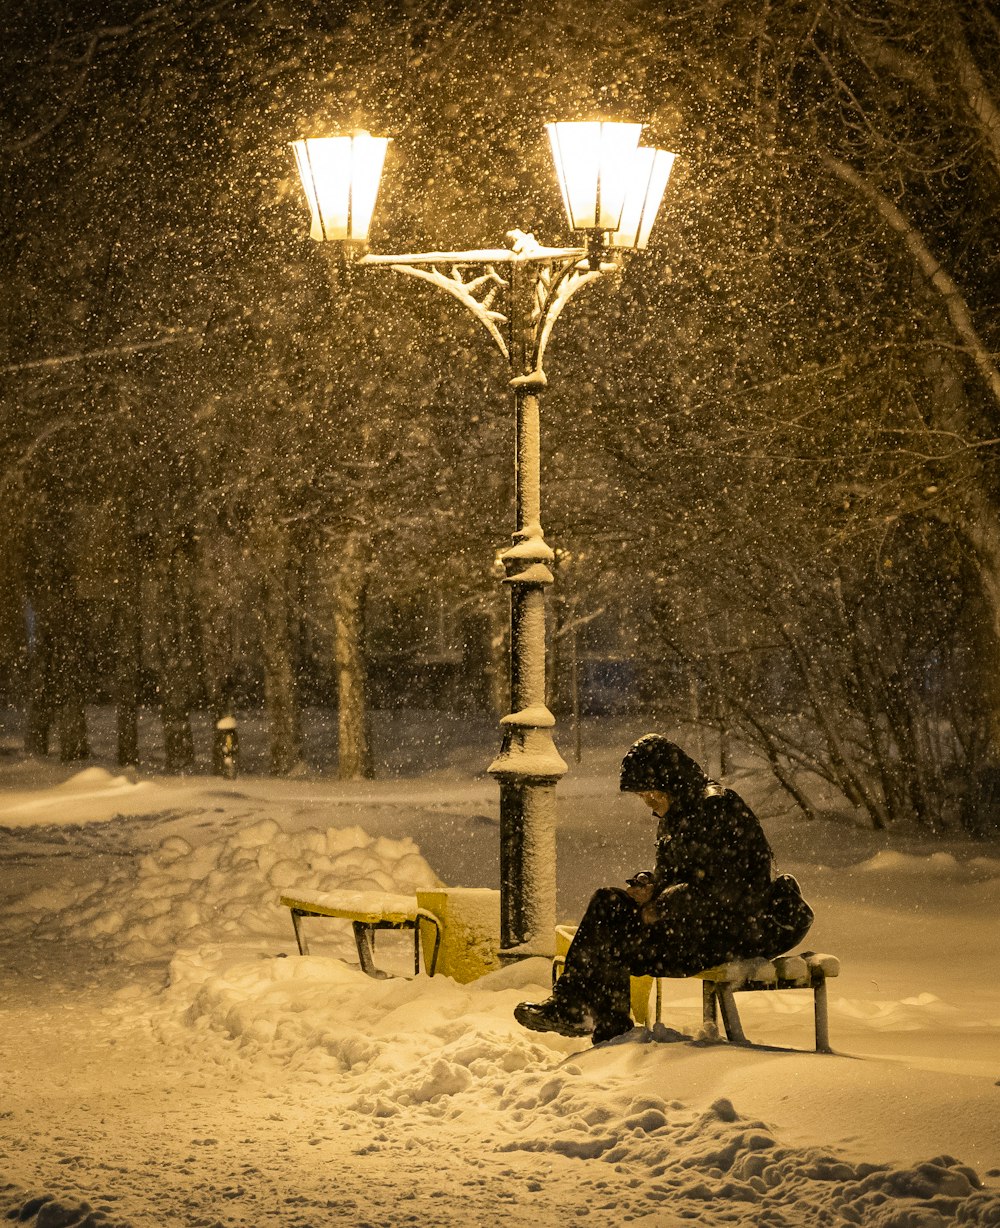 person sitting on chair near street light during night time